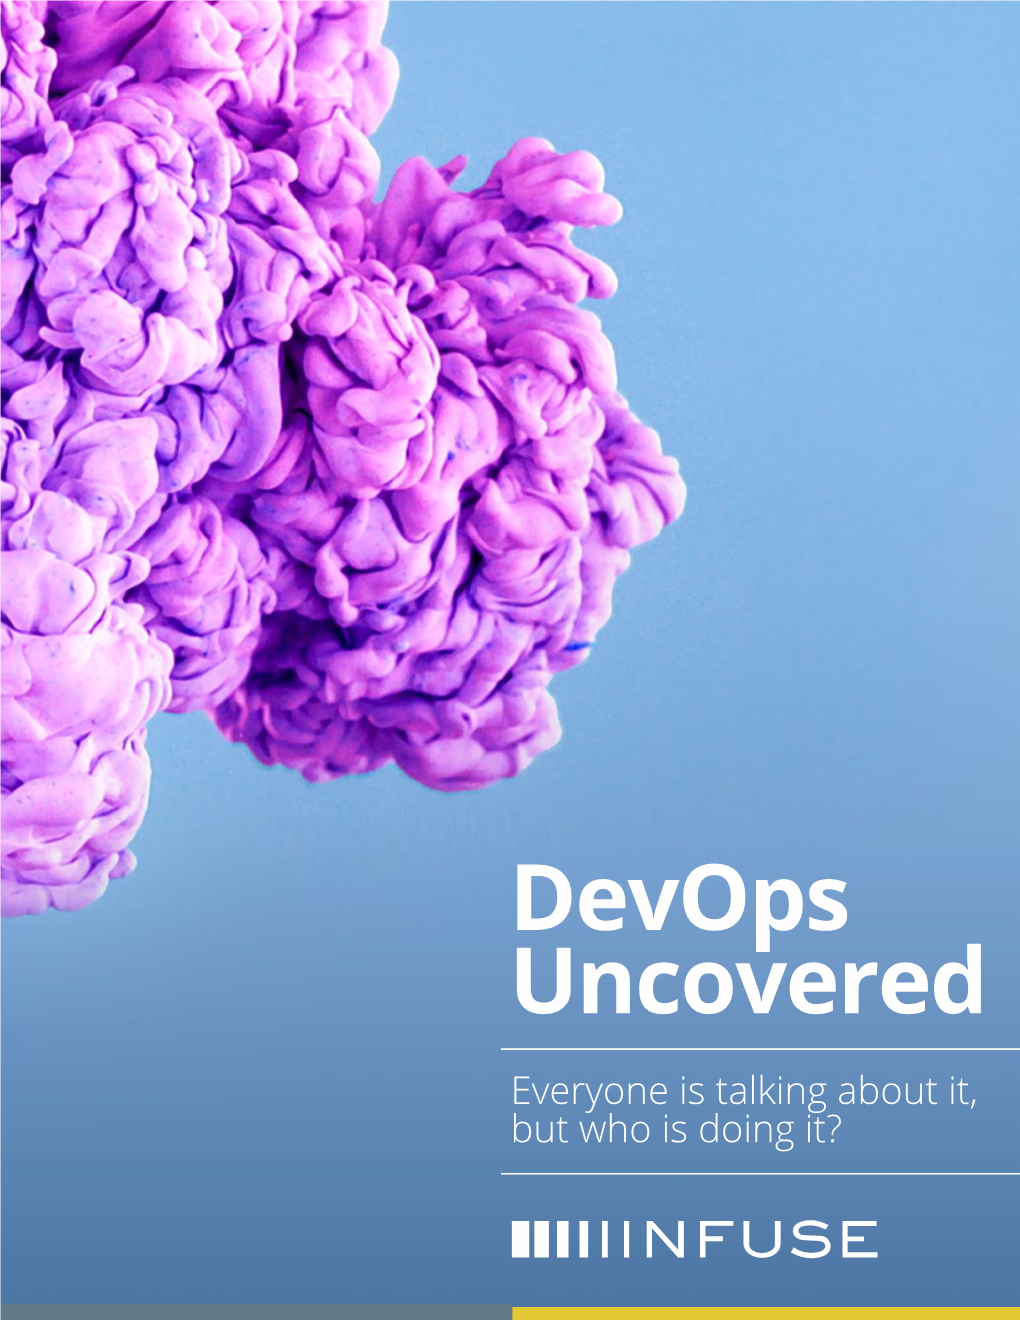 Devops Uncovered Everyone Is Talking About It, but Who Is Doing It? Devops Uncovered Everyone Is Talking About It, but Who Is Doing It?